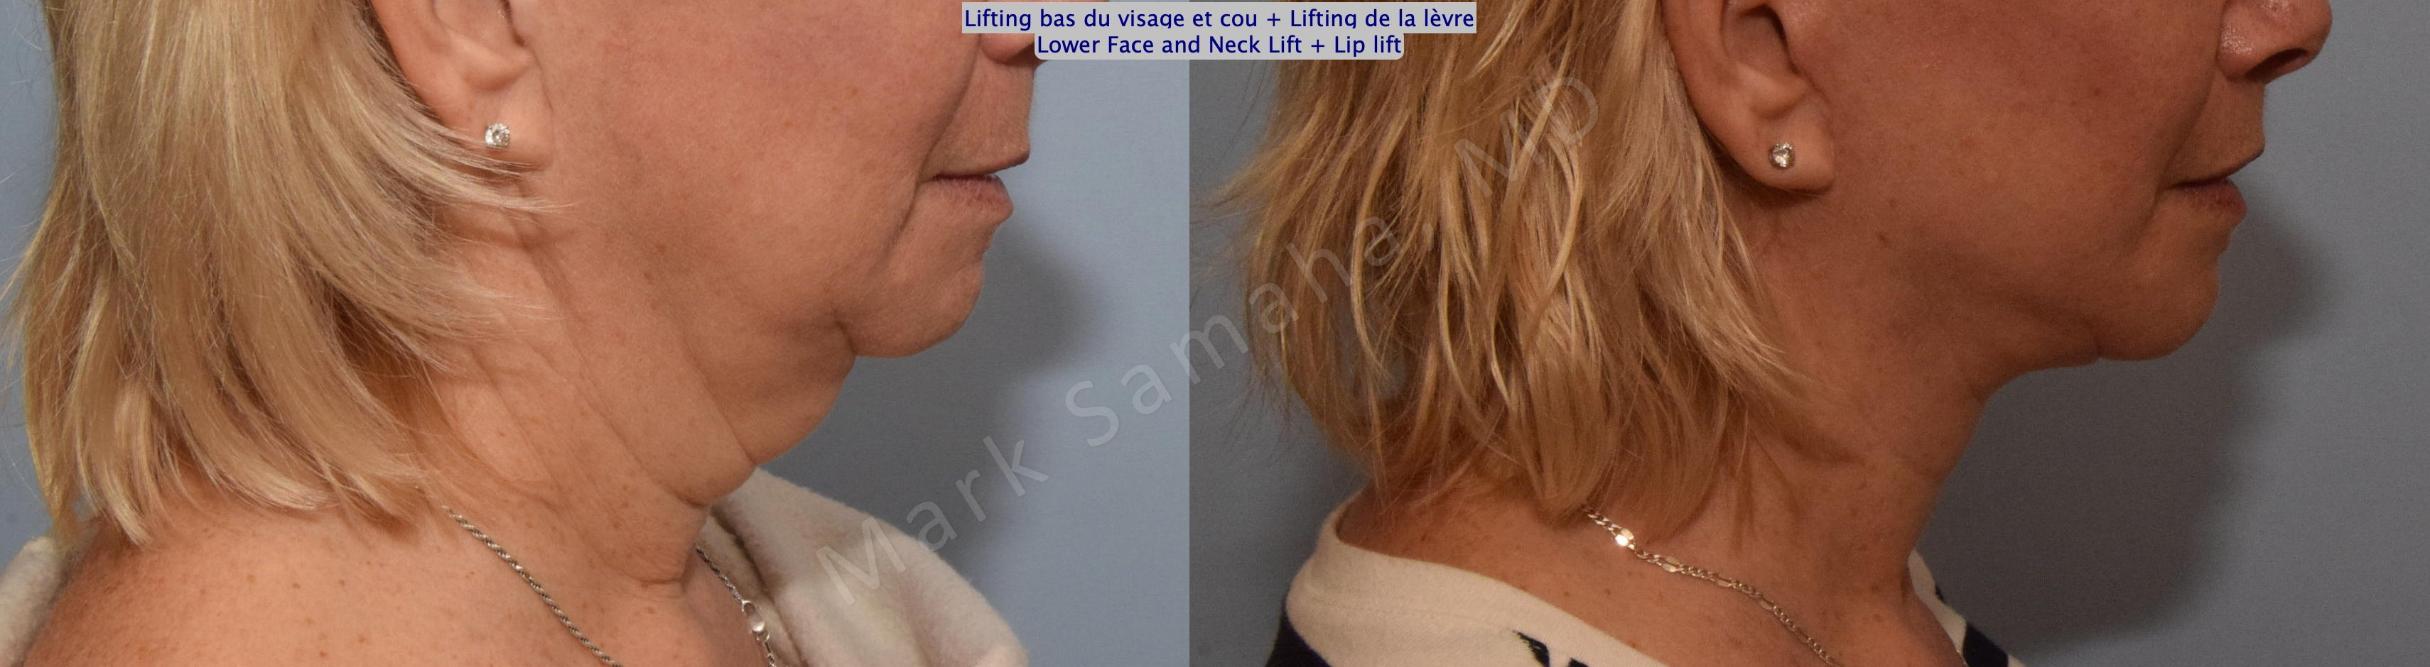 Before & After Facelift / Necklift - Lifting du visage / Cou Case 158 Right Side View in Mount Royal, QC